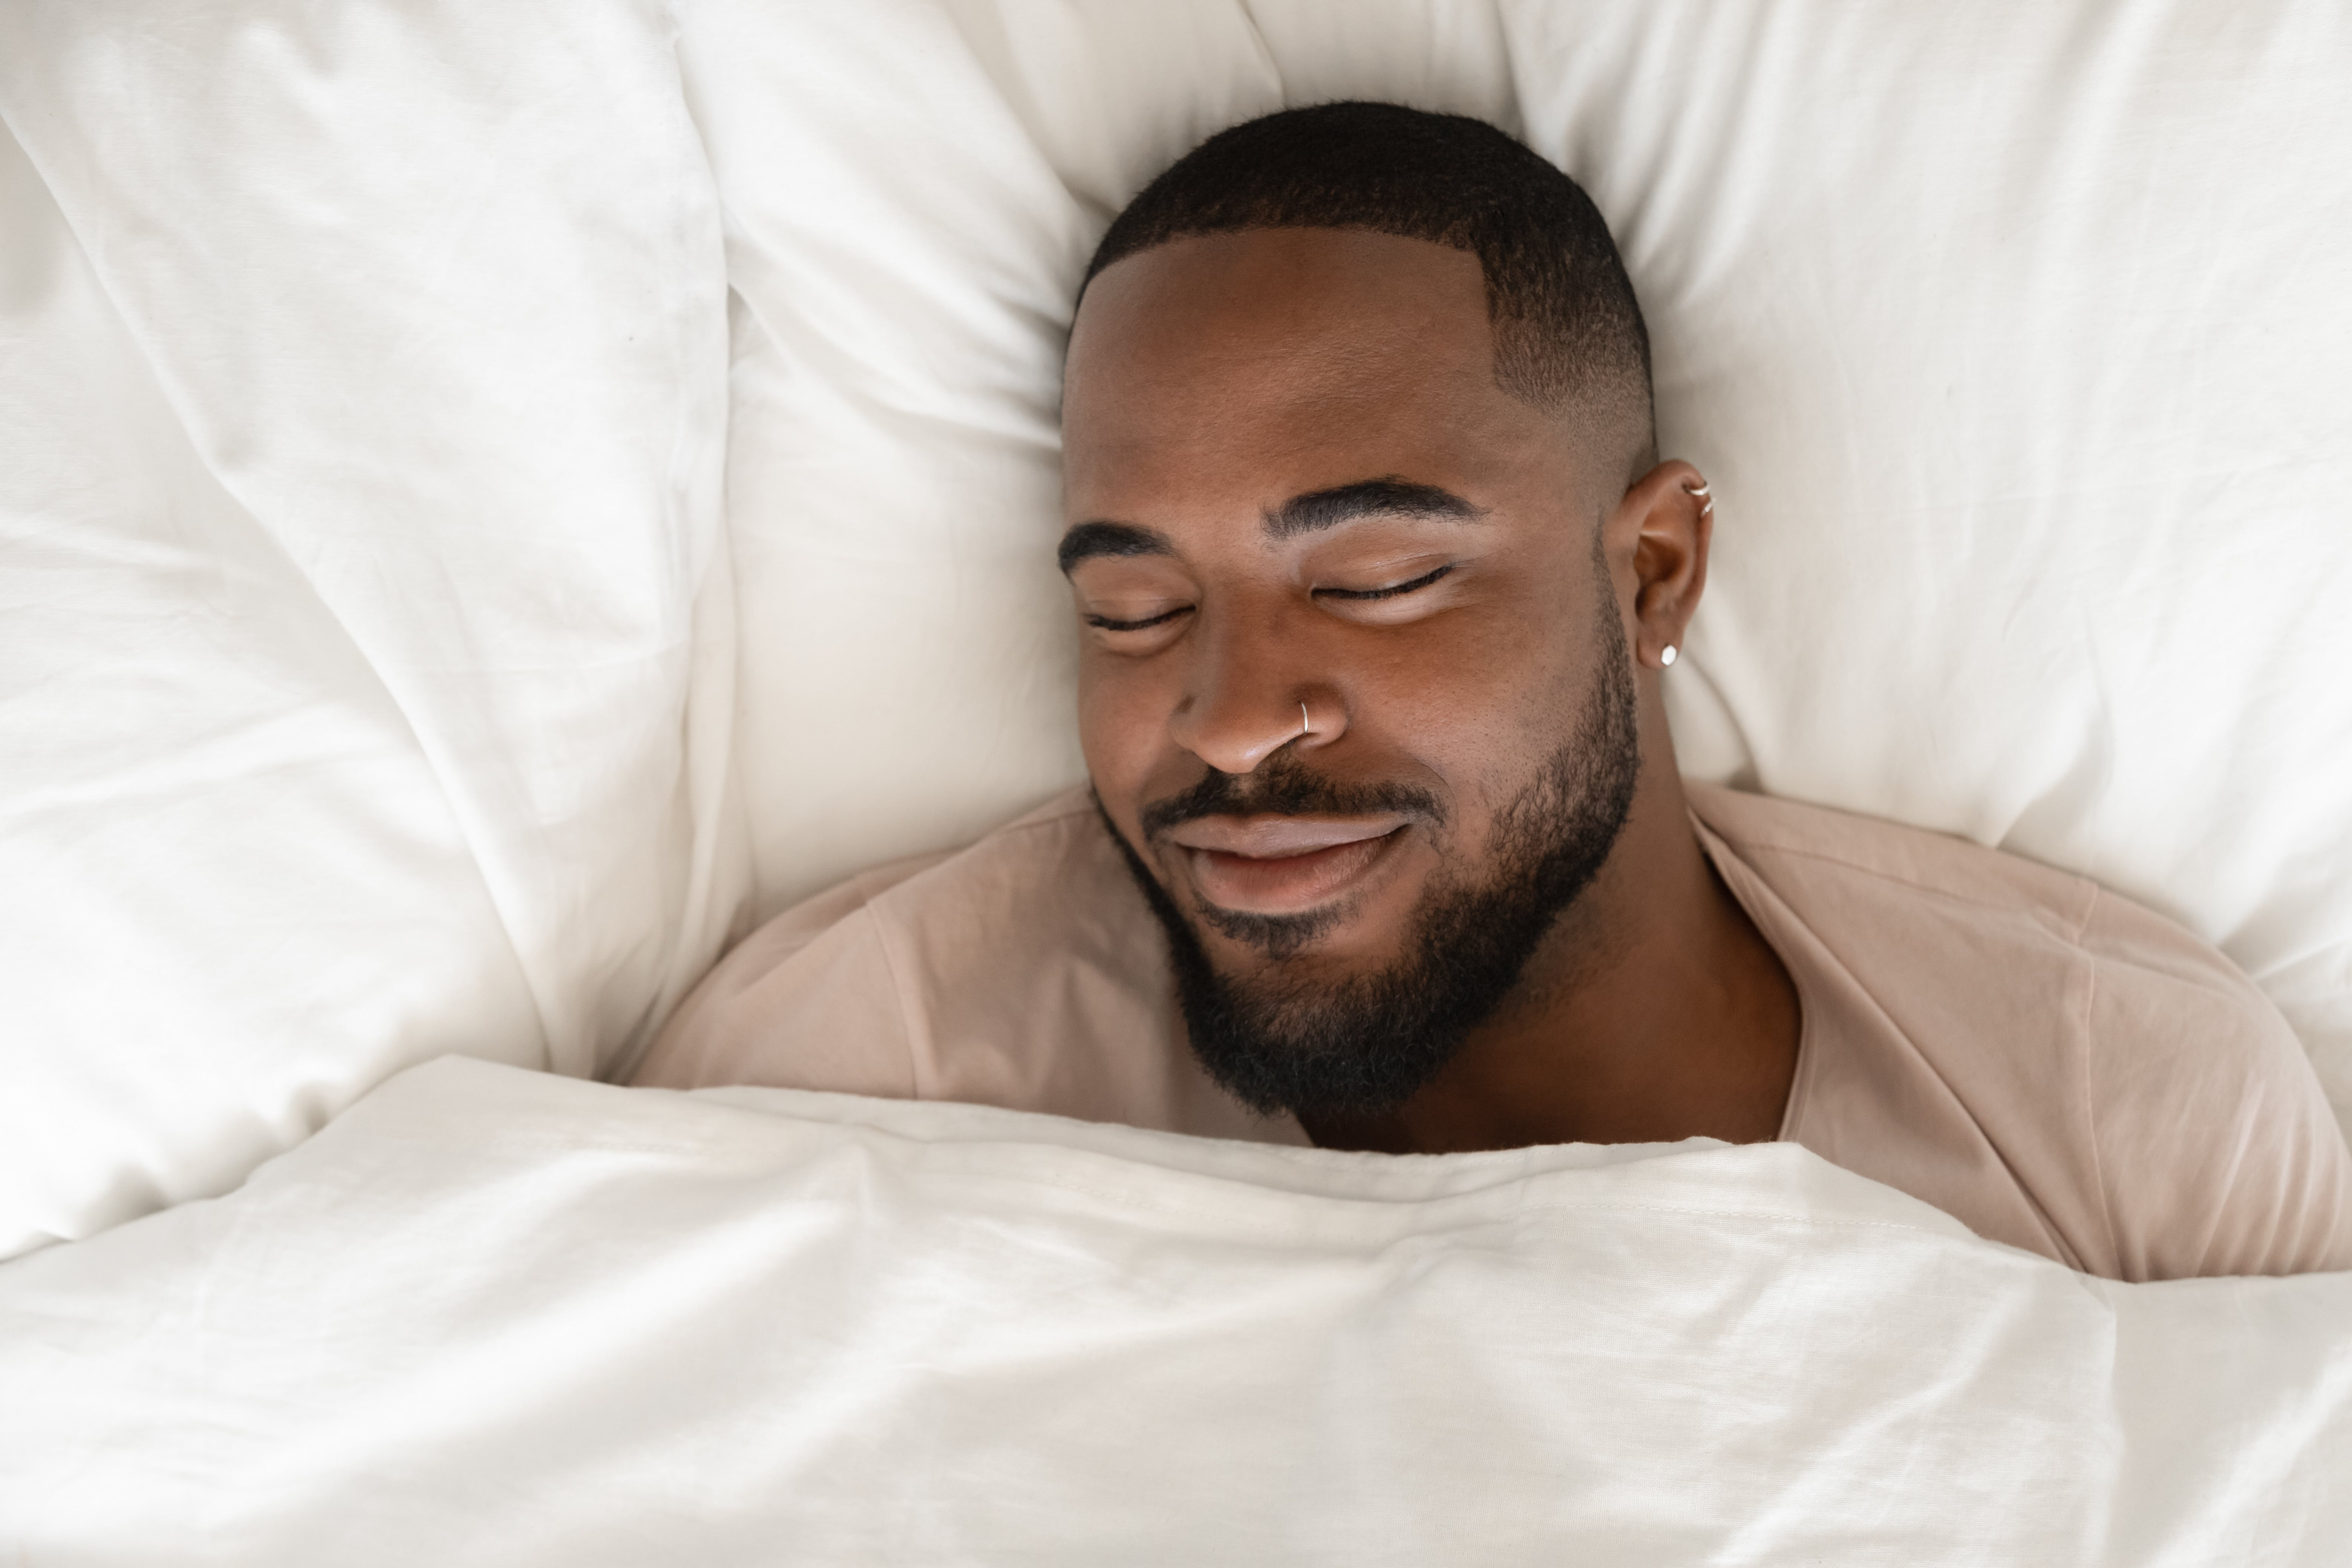 Bird's eye view of a man on a bed smiling in his sleep 